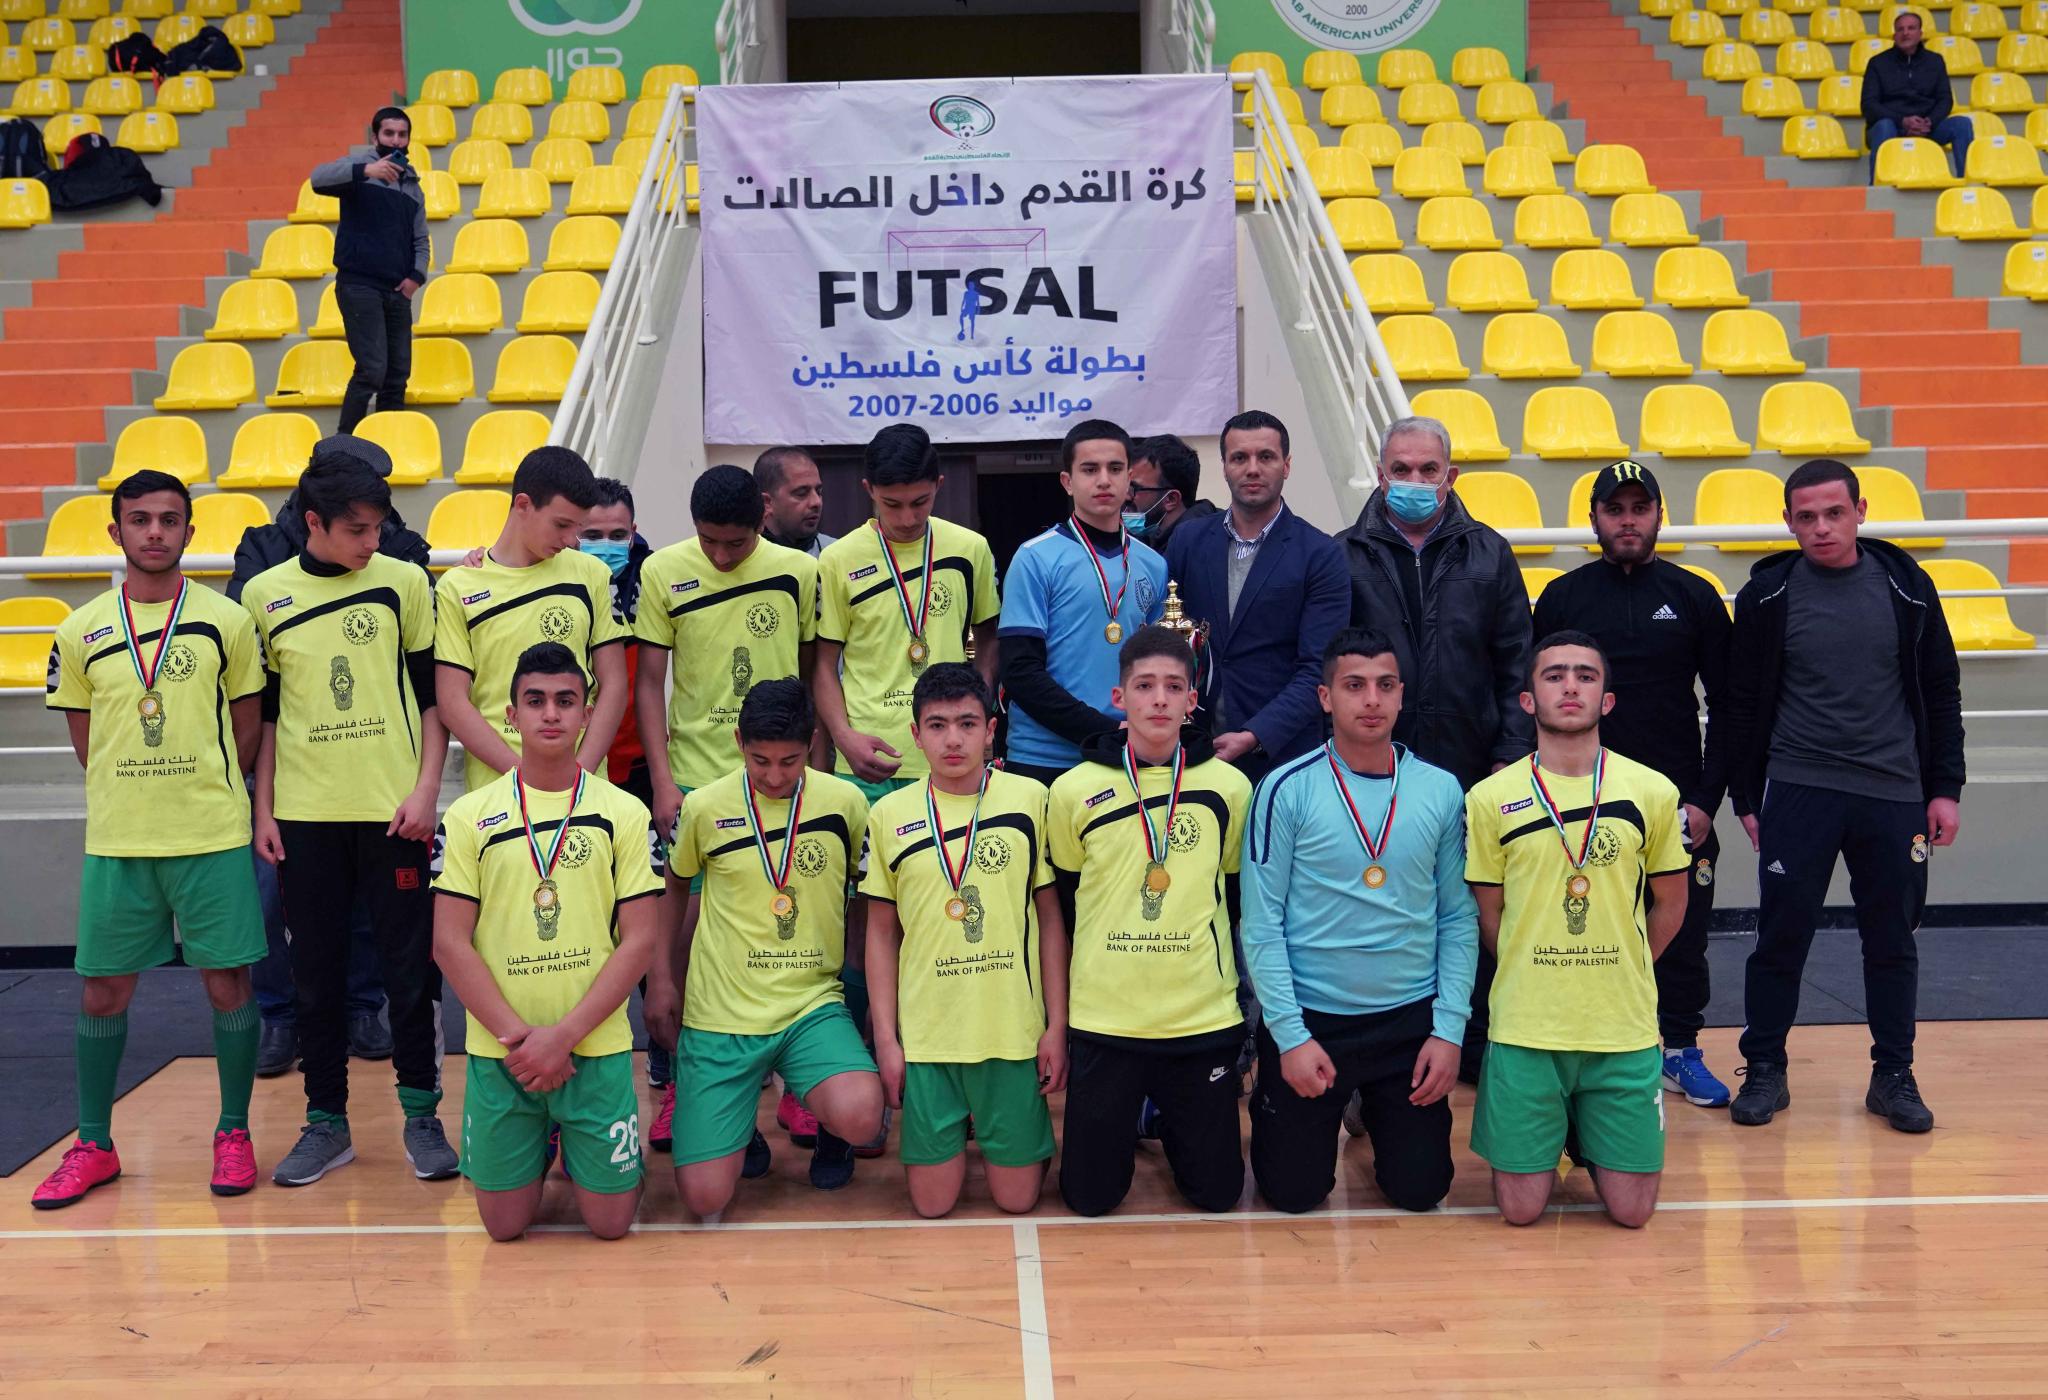 AAUP Hosts the Palestine Football Cup Finals in the Sport Hall